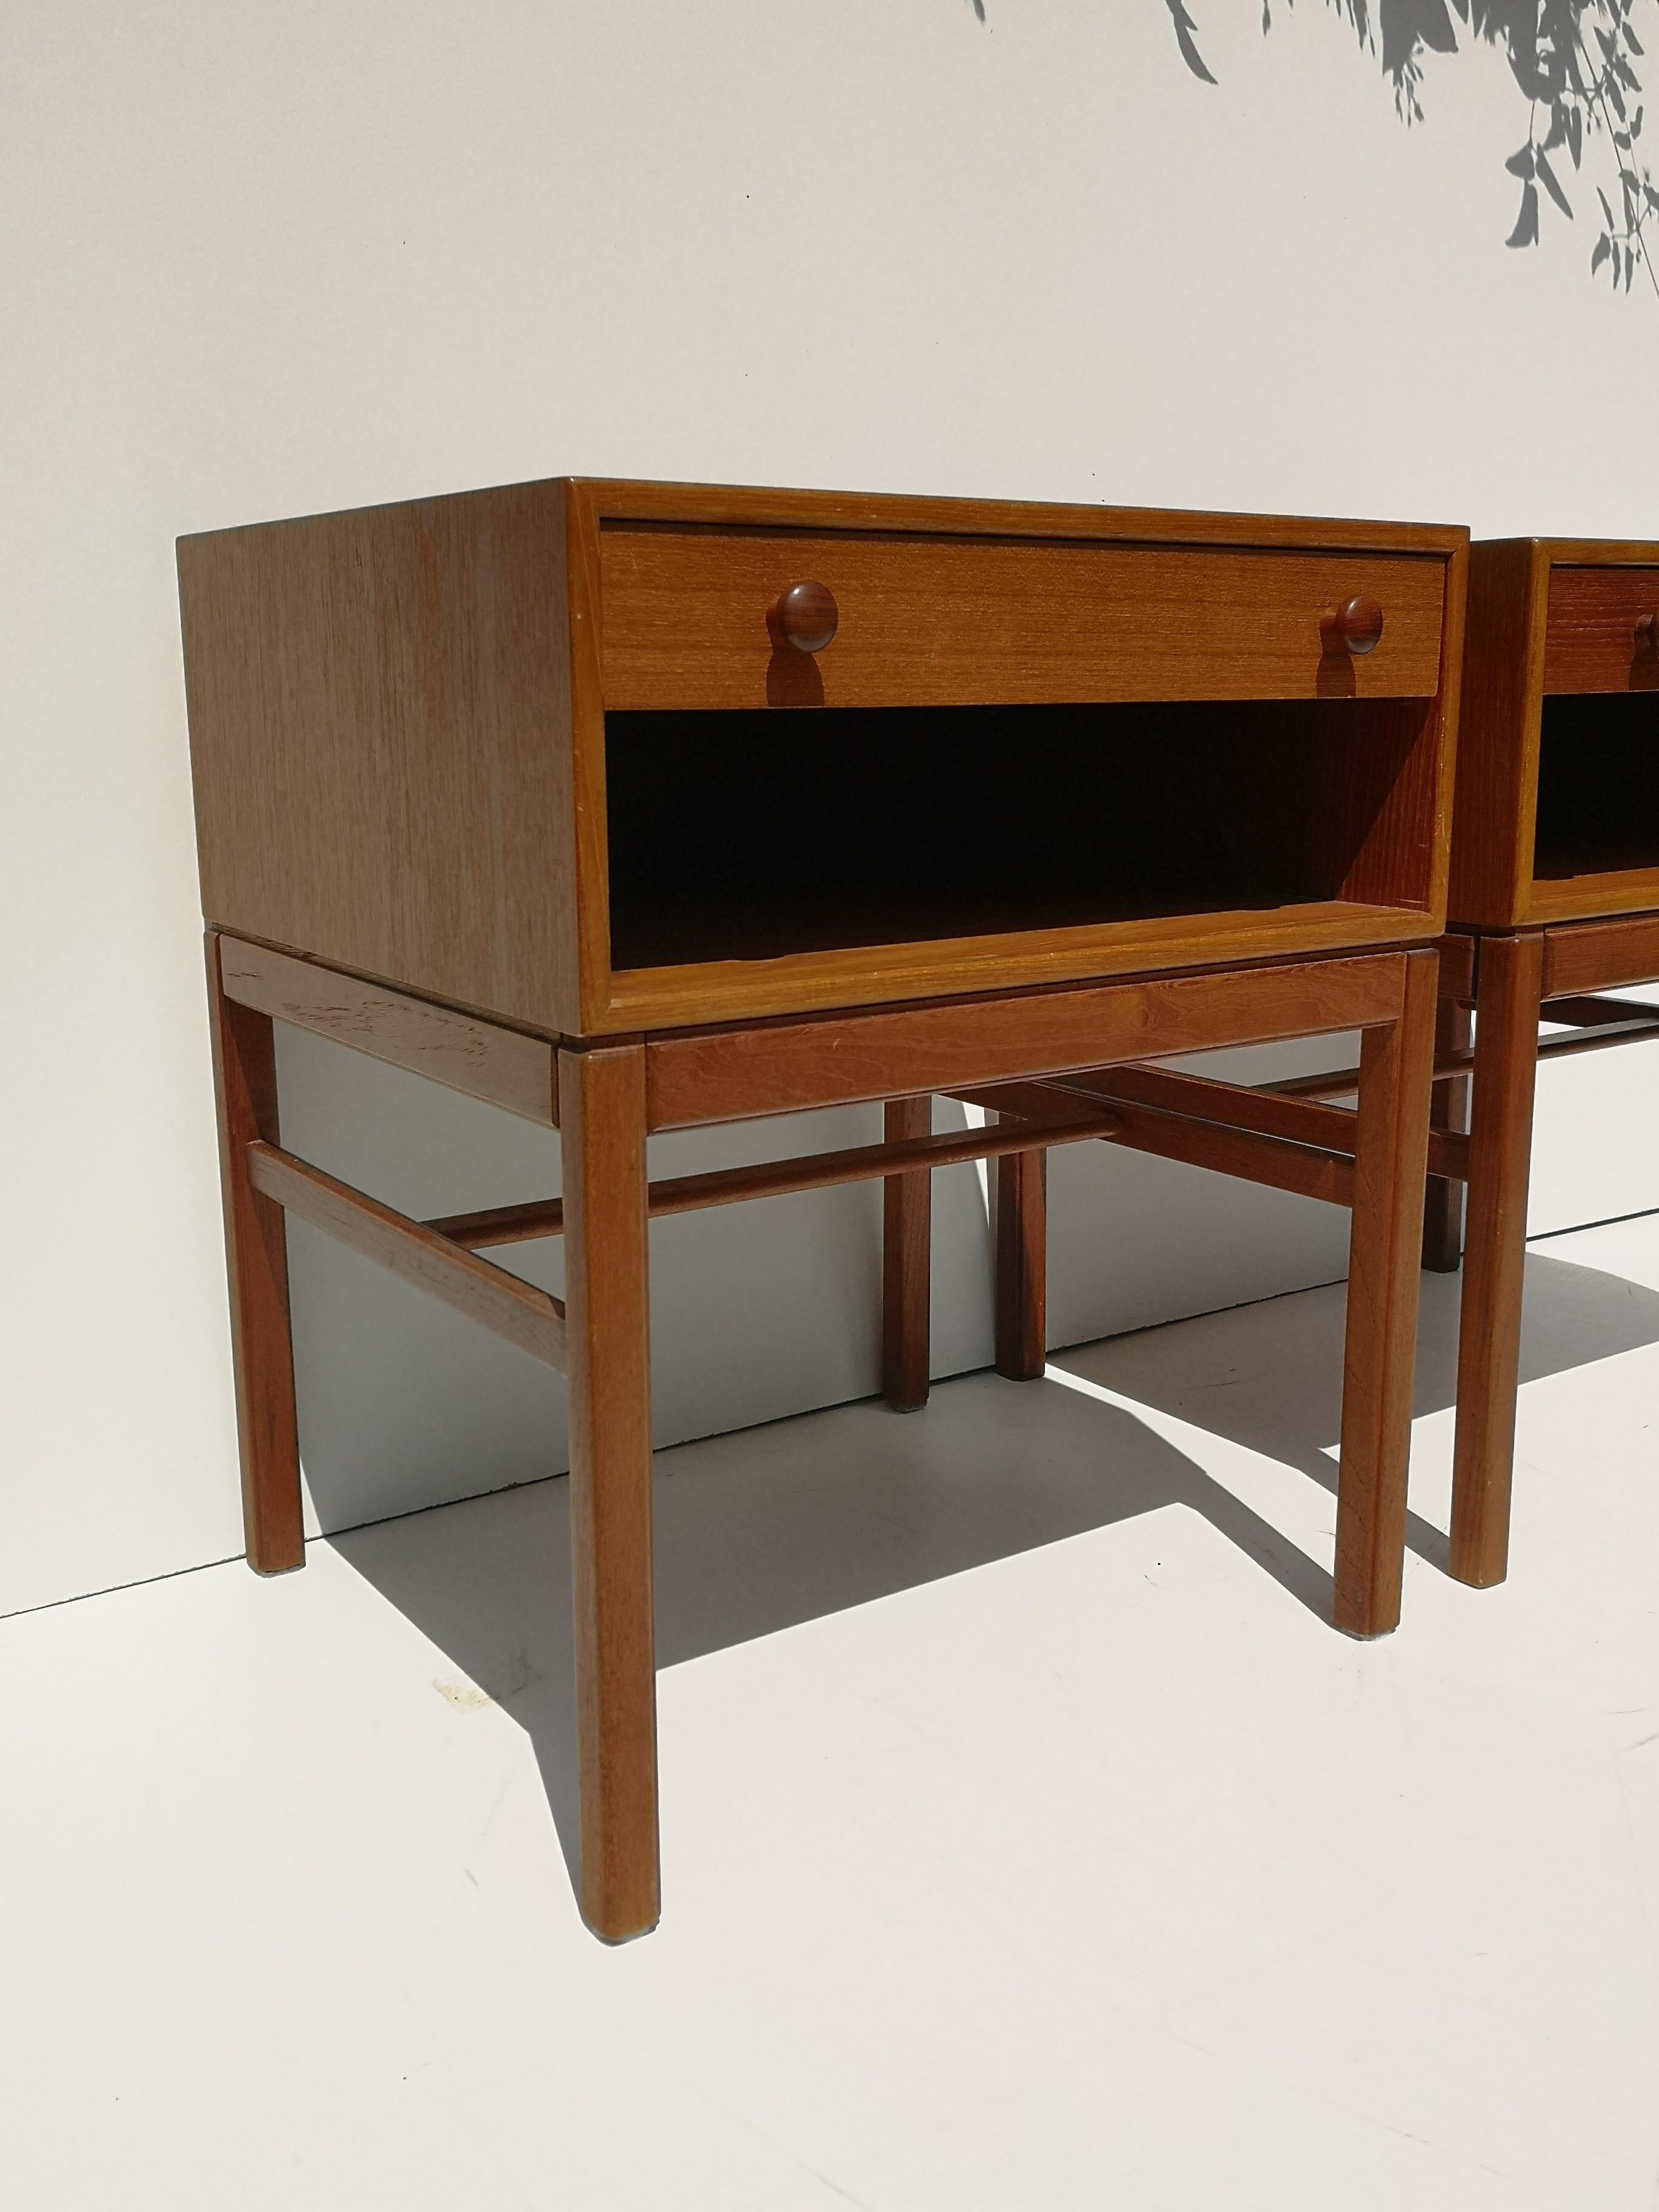 Pair of high quality Swedish teak nightstands / end tables, circa 1960s. Designed by Sven Engström and Gunnar Myrstrand, each piece features solid wood dovetailed drawer fronts, lots of storage, and is finished on all sides. Exceptional original